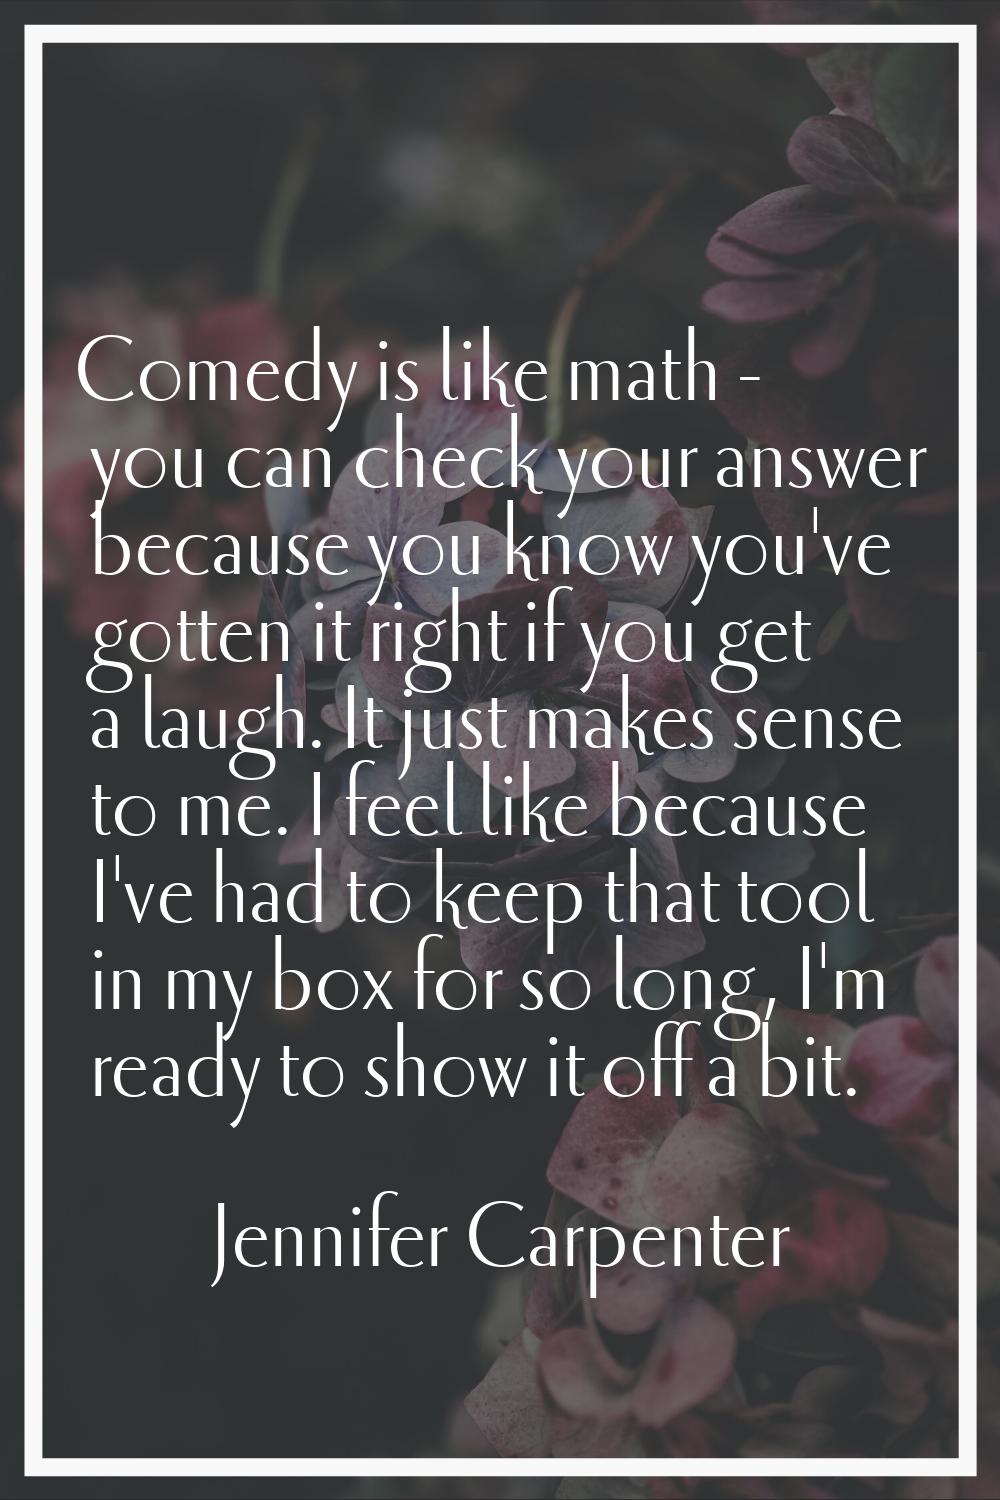 Comedy is like math - you can check your answer because you know you've gotten it right if you get 